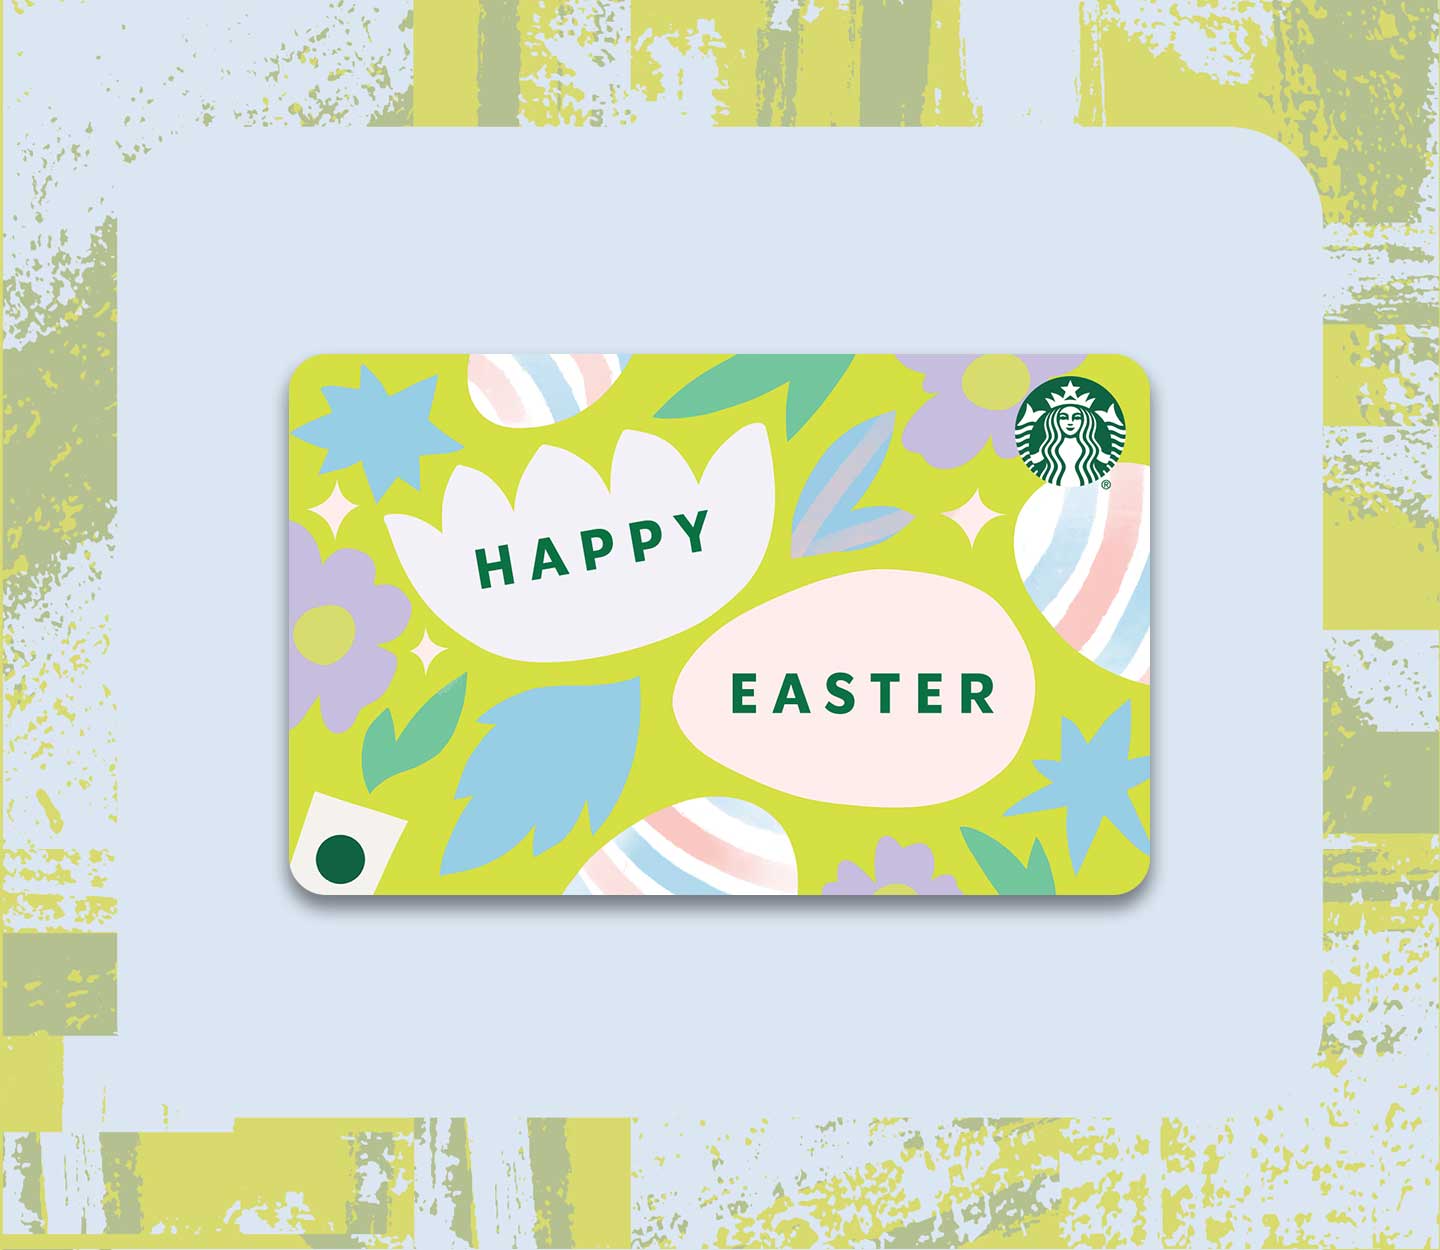 Gift card that reads HAPPY EASTER with an illustration of pastel-colored eggs.